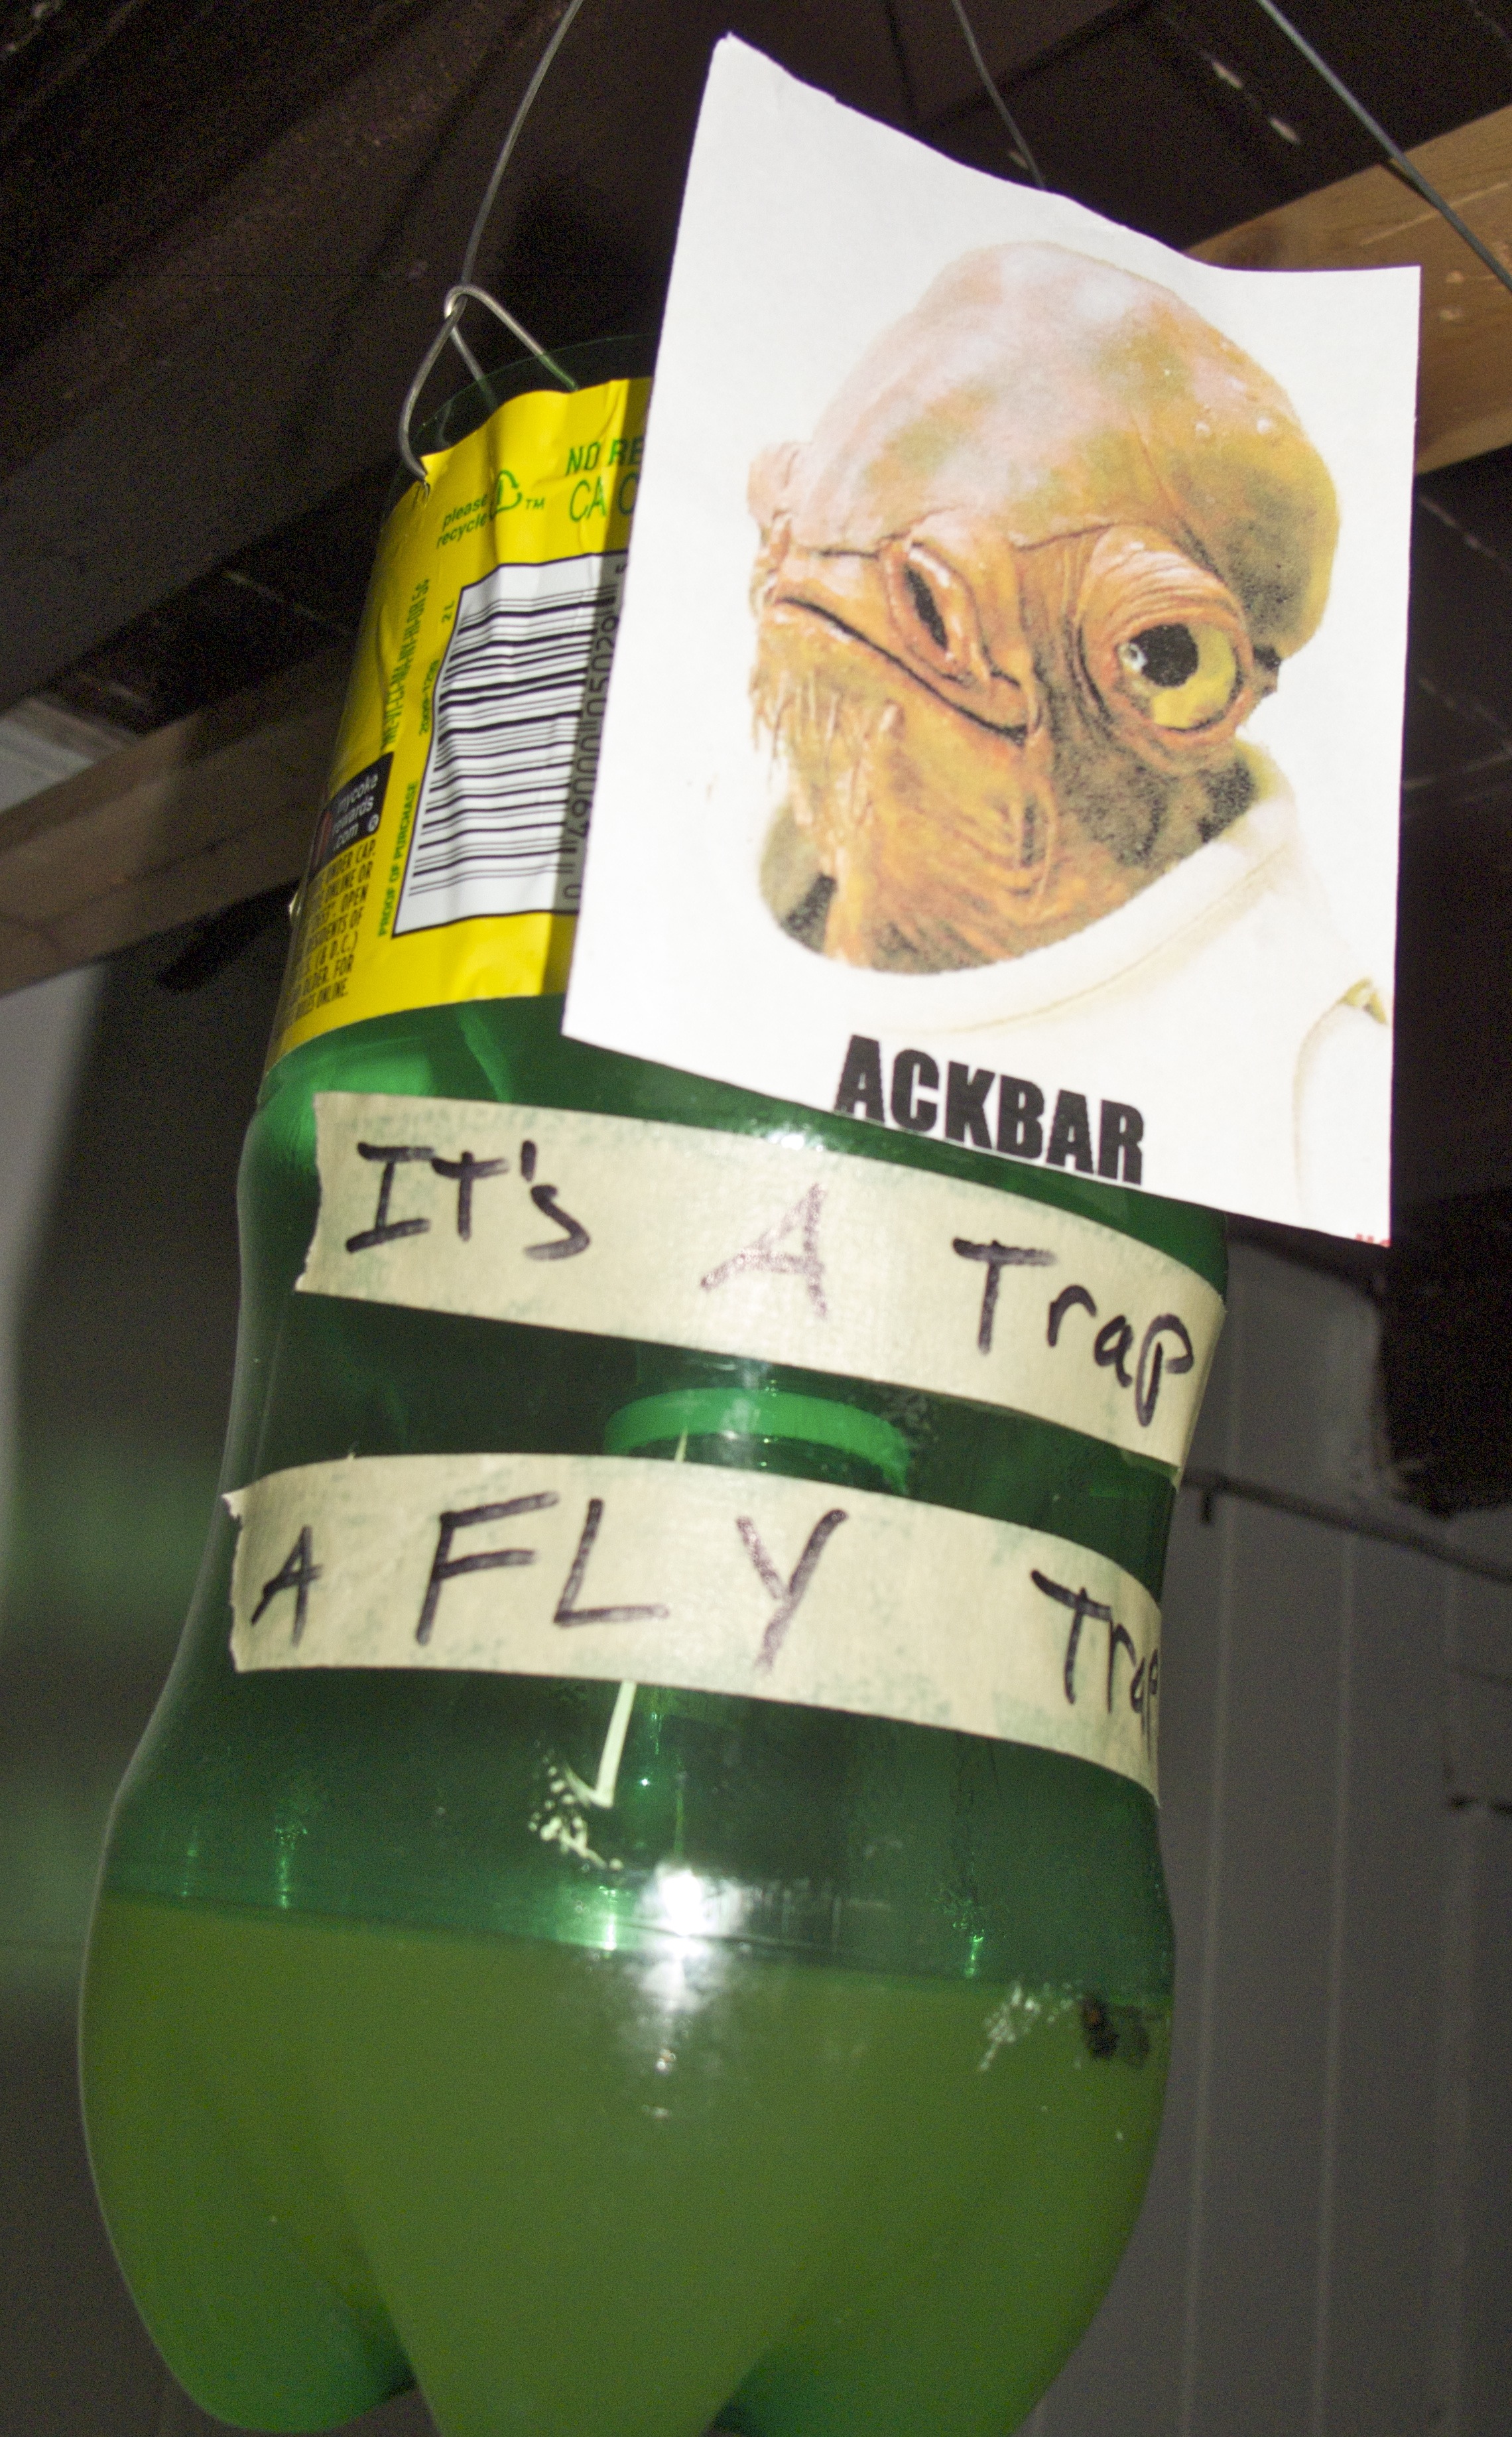 Its a fly trap